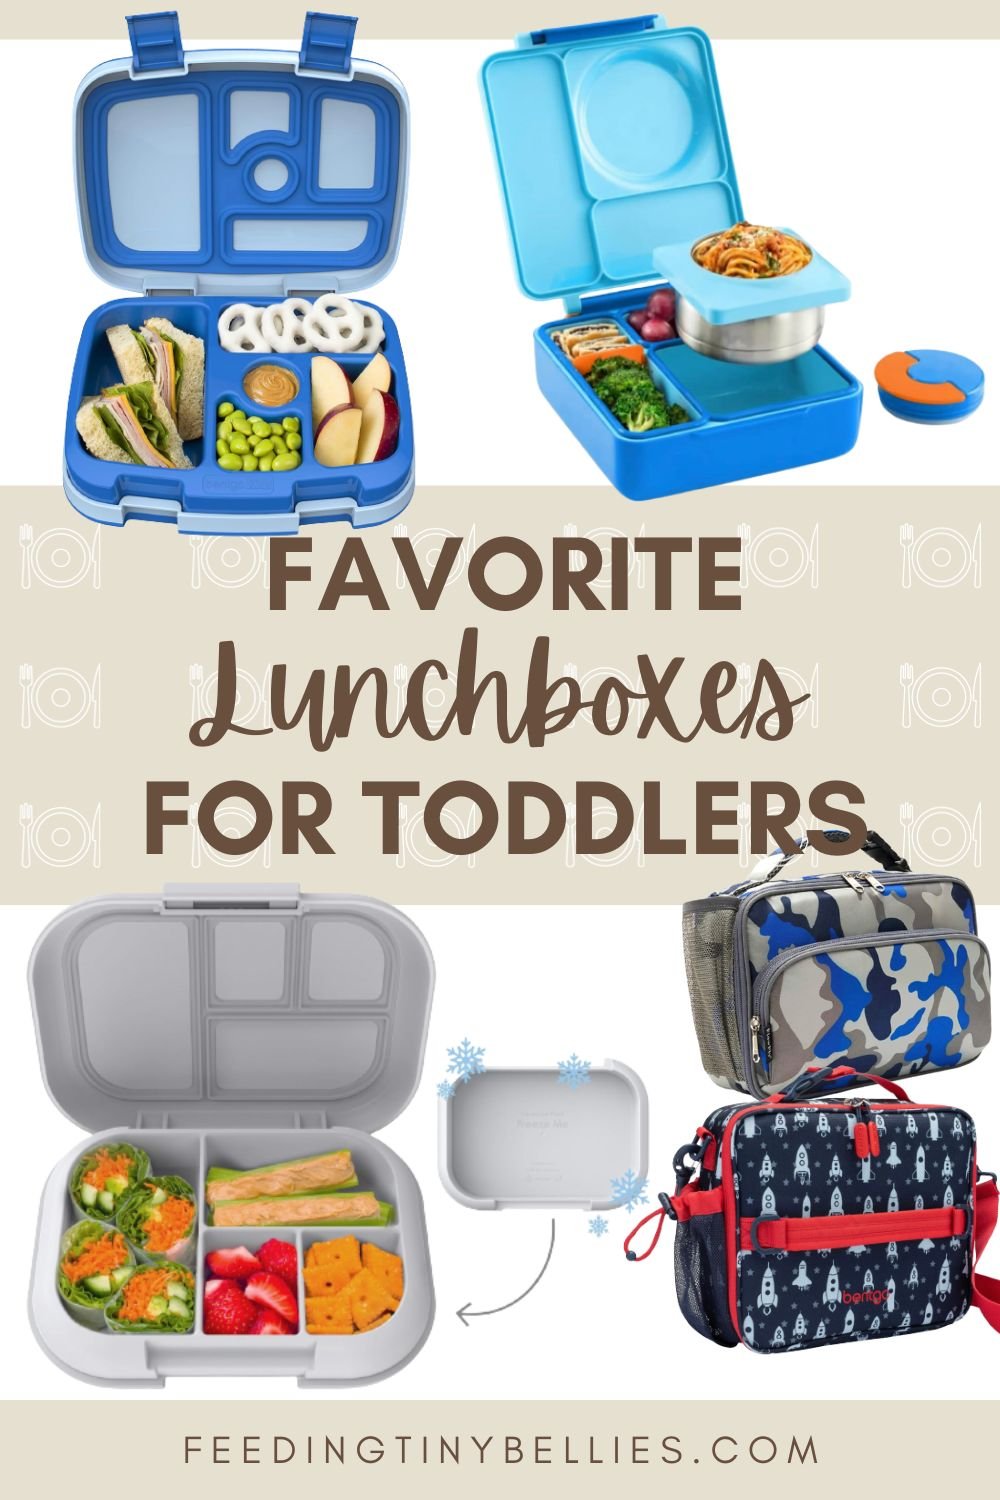 Favorite lunchboxes for toddlers.